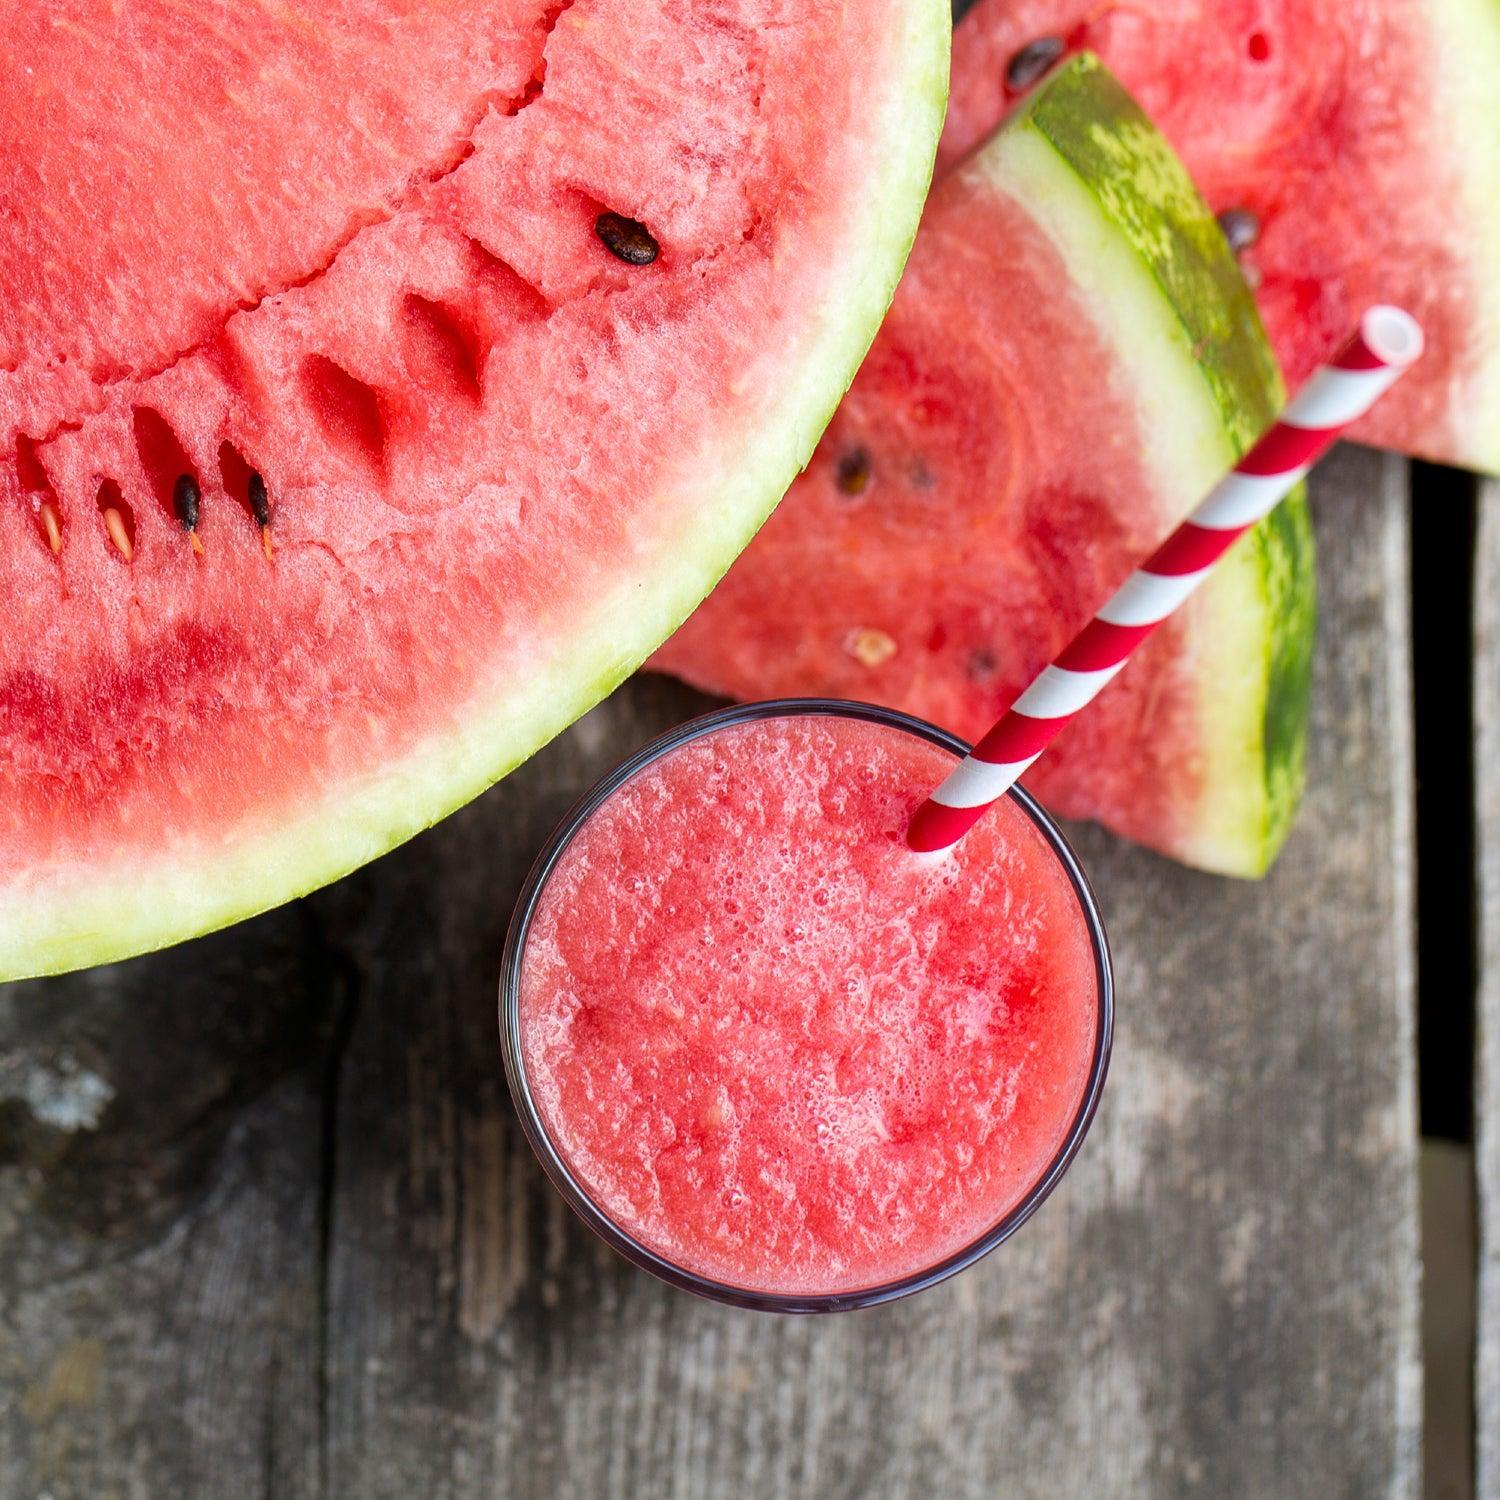 Watermelon Juice Benefits A Refreshing and Nutritious Drink